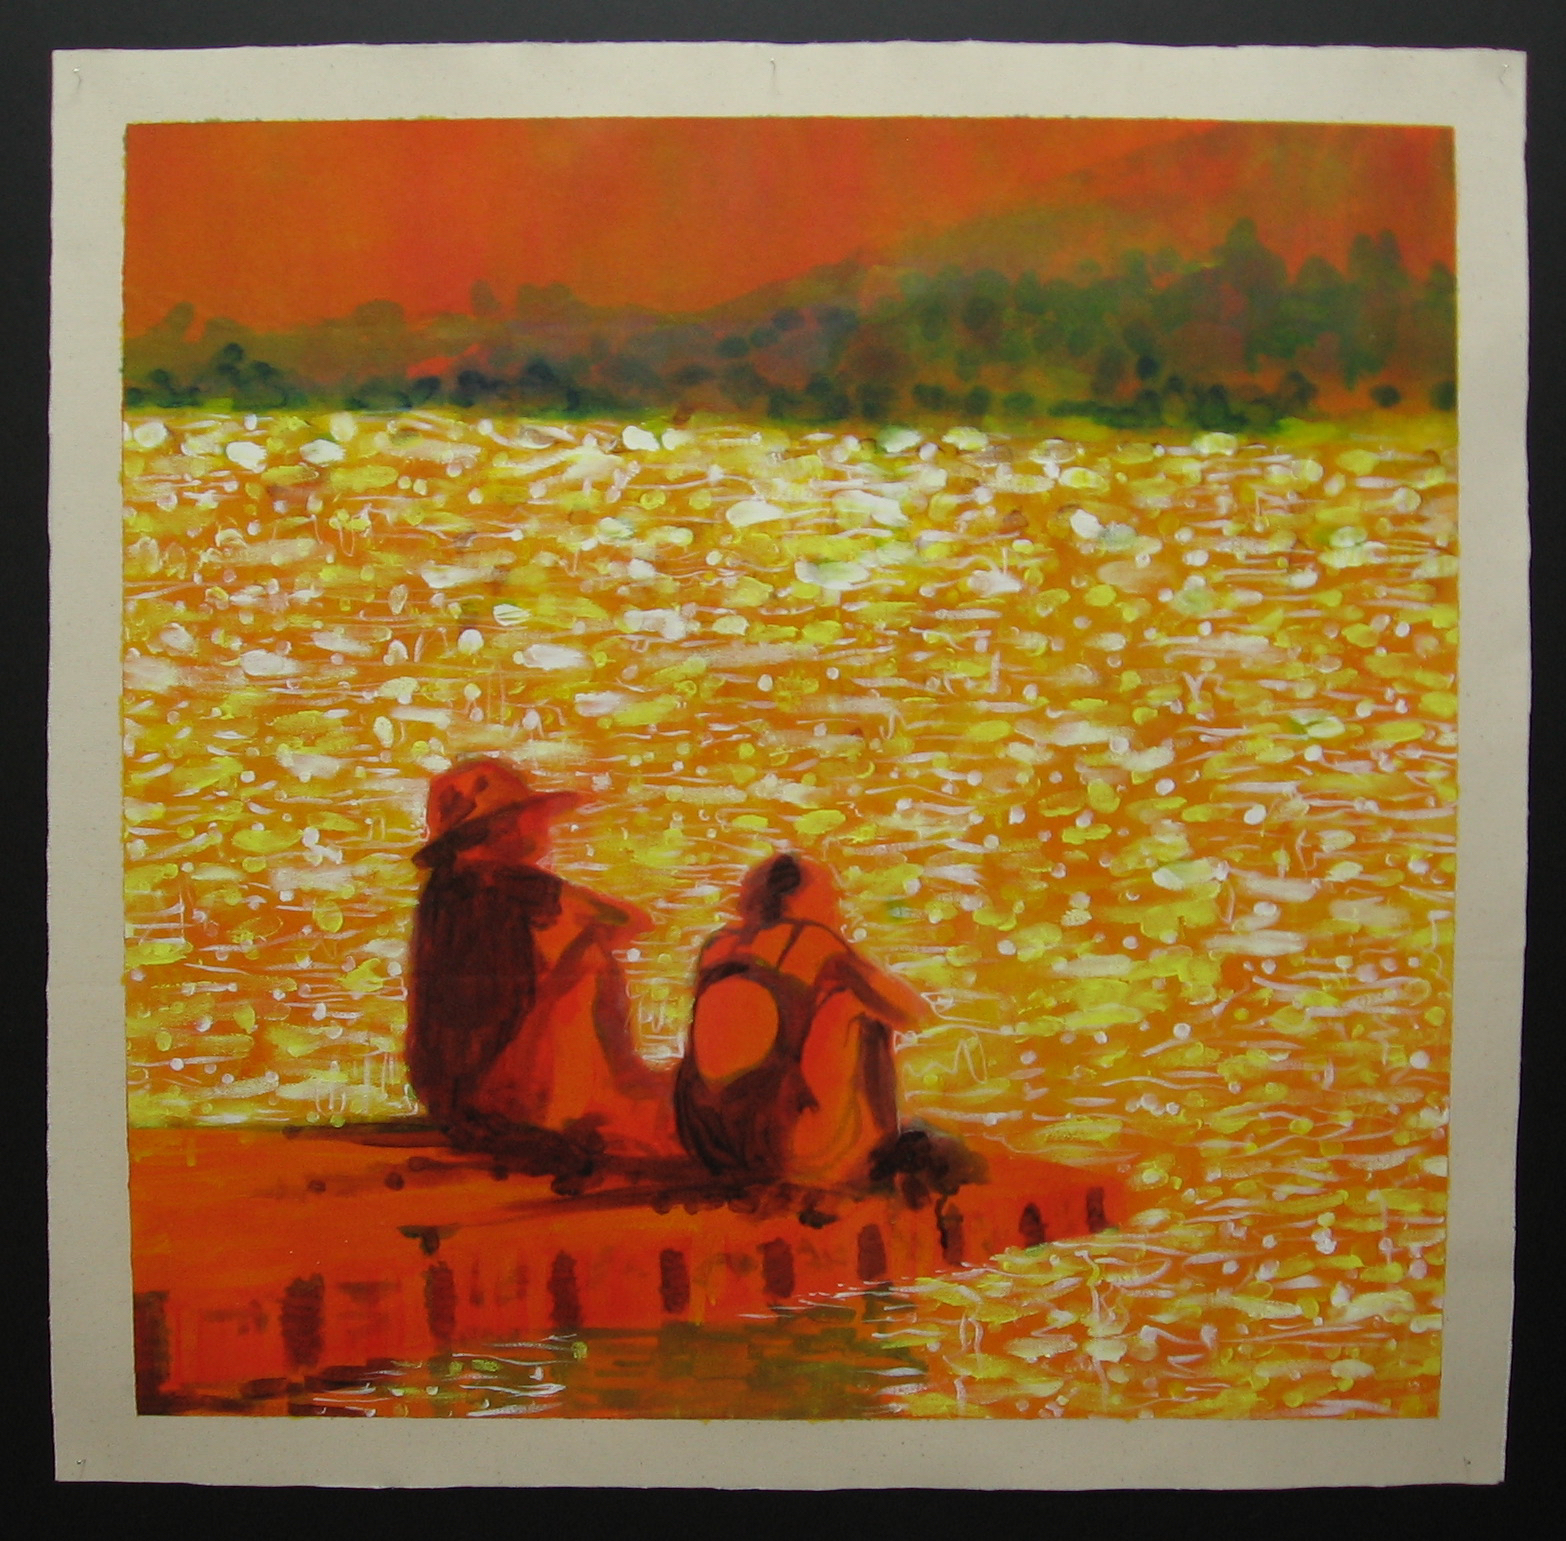 two figures sitting on a dock by a shimmering lake